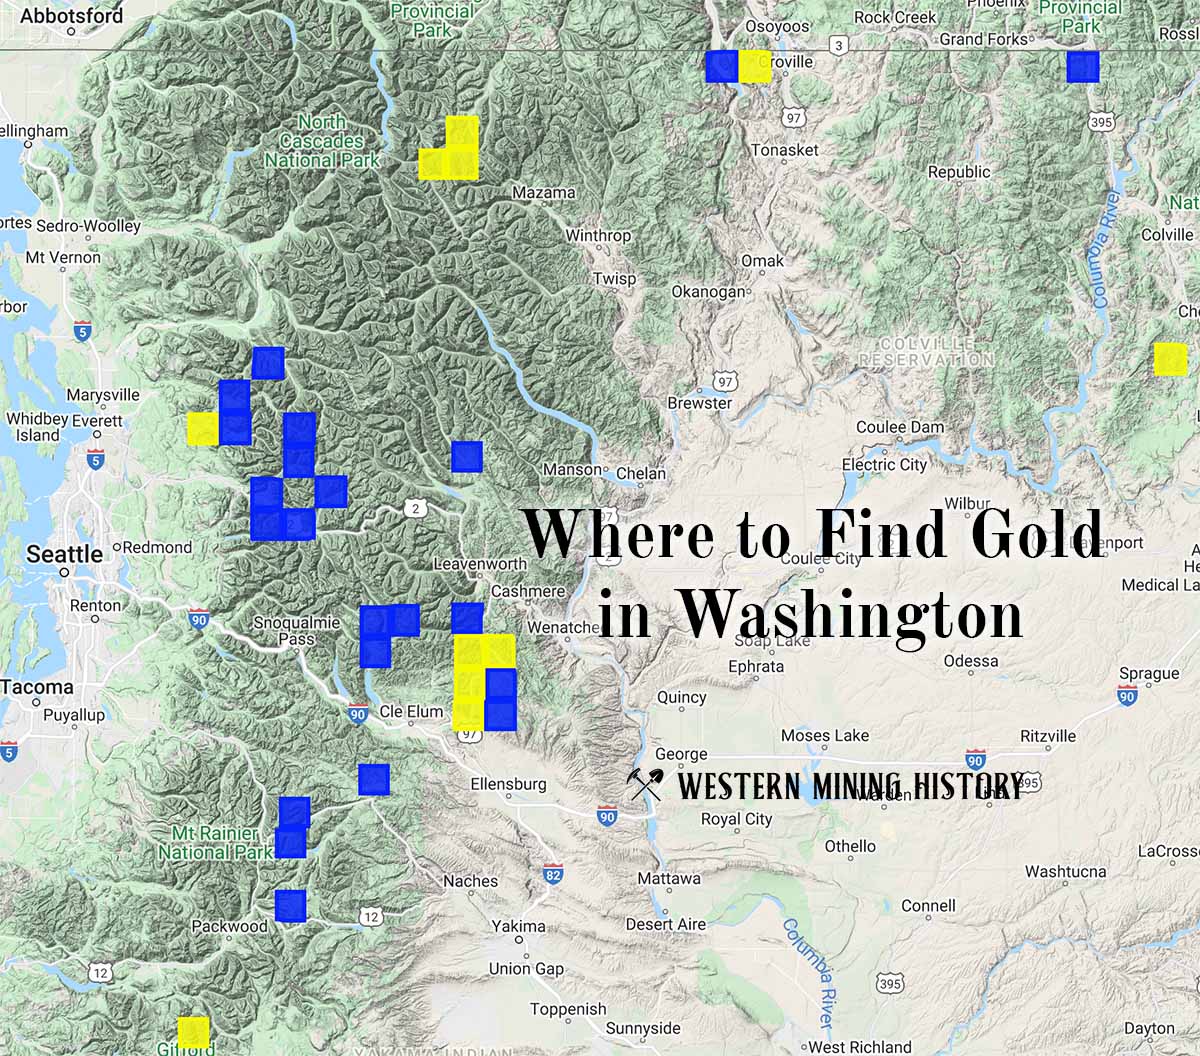 Where to Find Gold in Washington